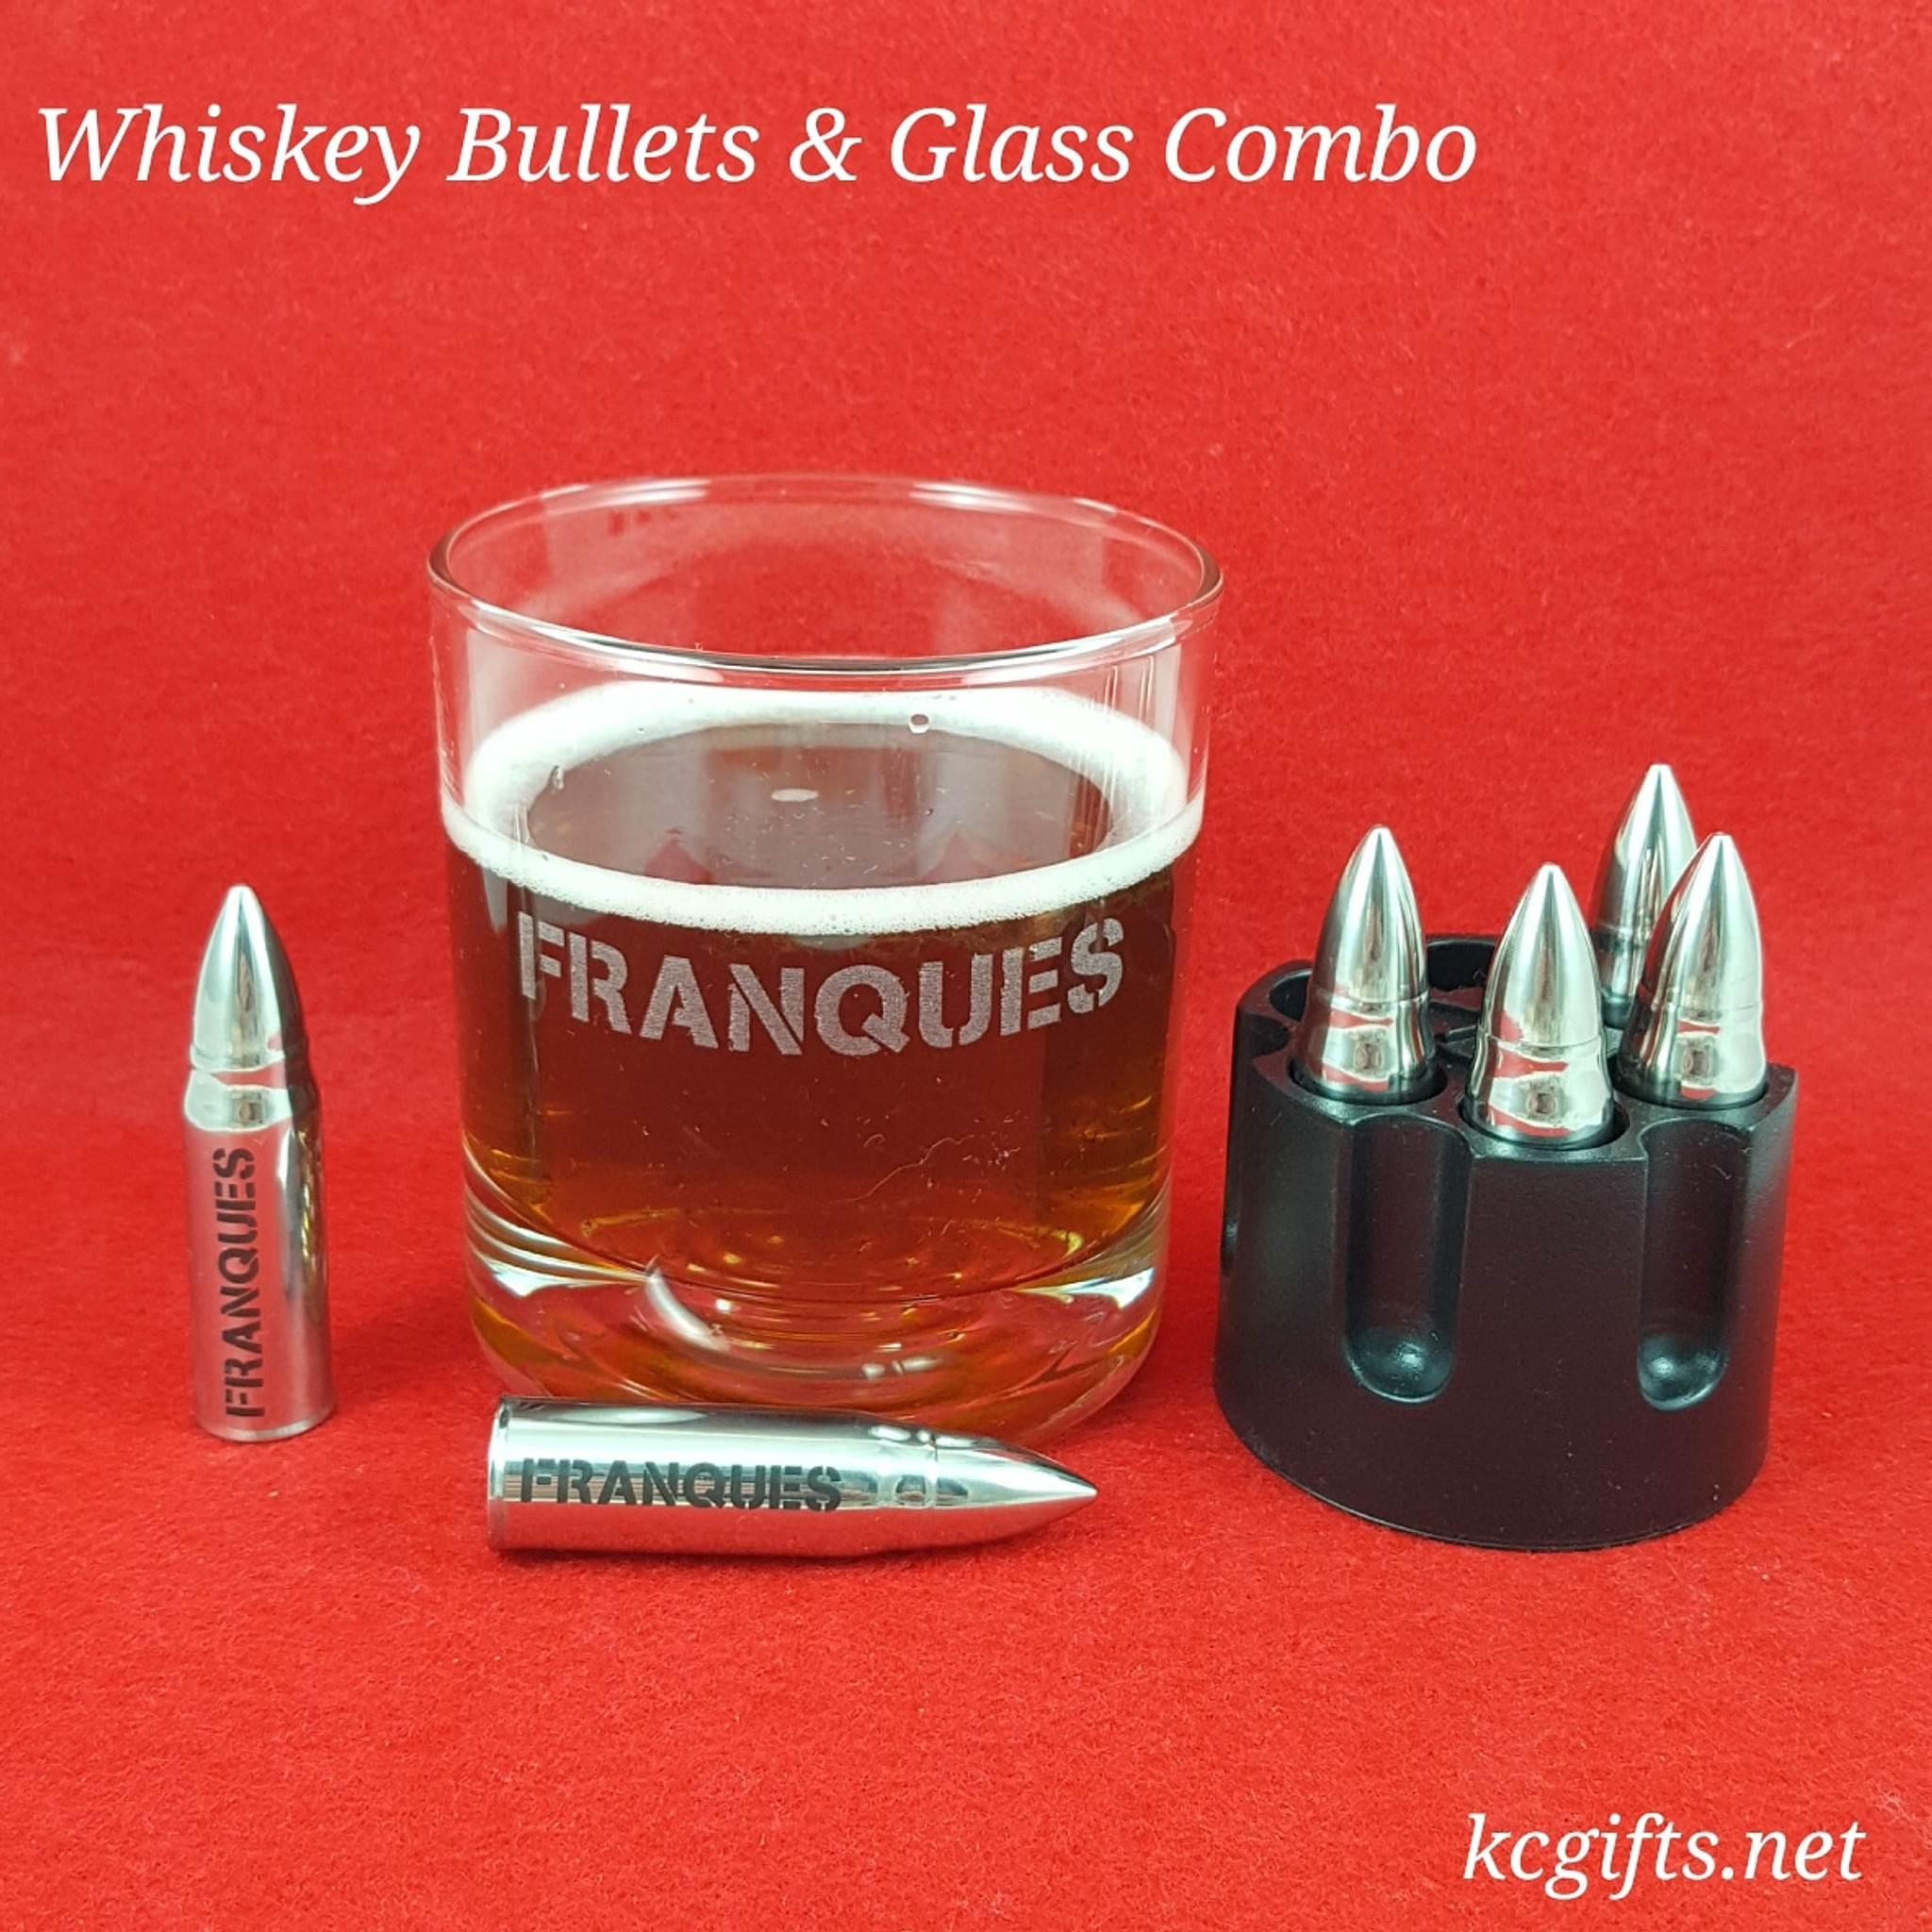 Whiskey Bullets - Ice cubes